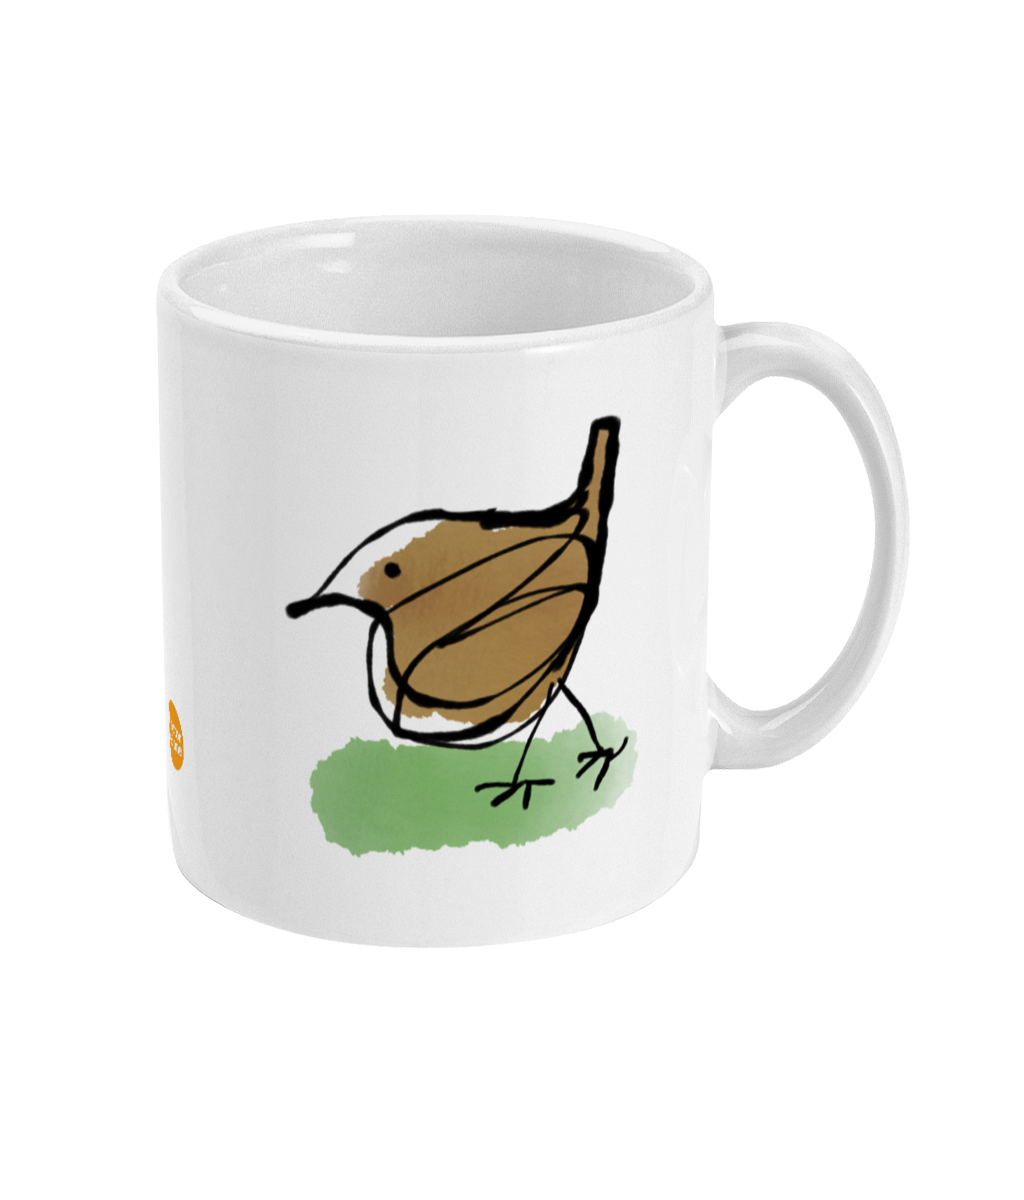 Little Jenny Wren design coffee mug by Hector and Bone Right View